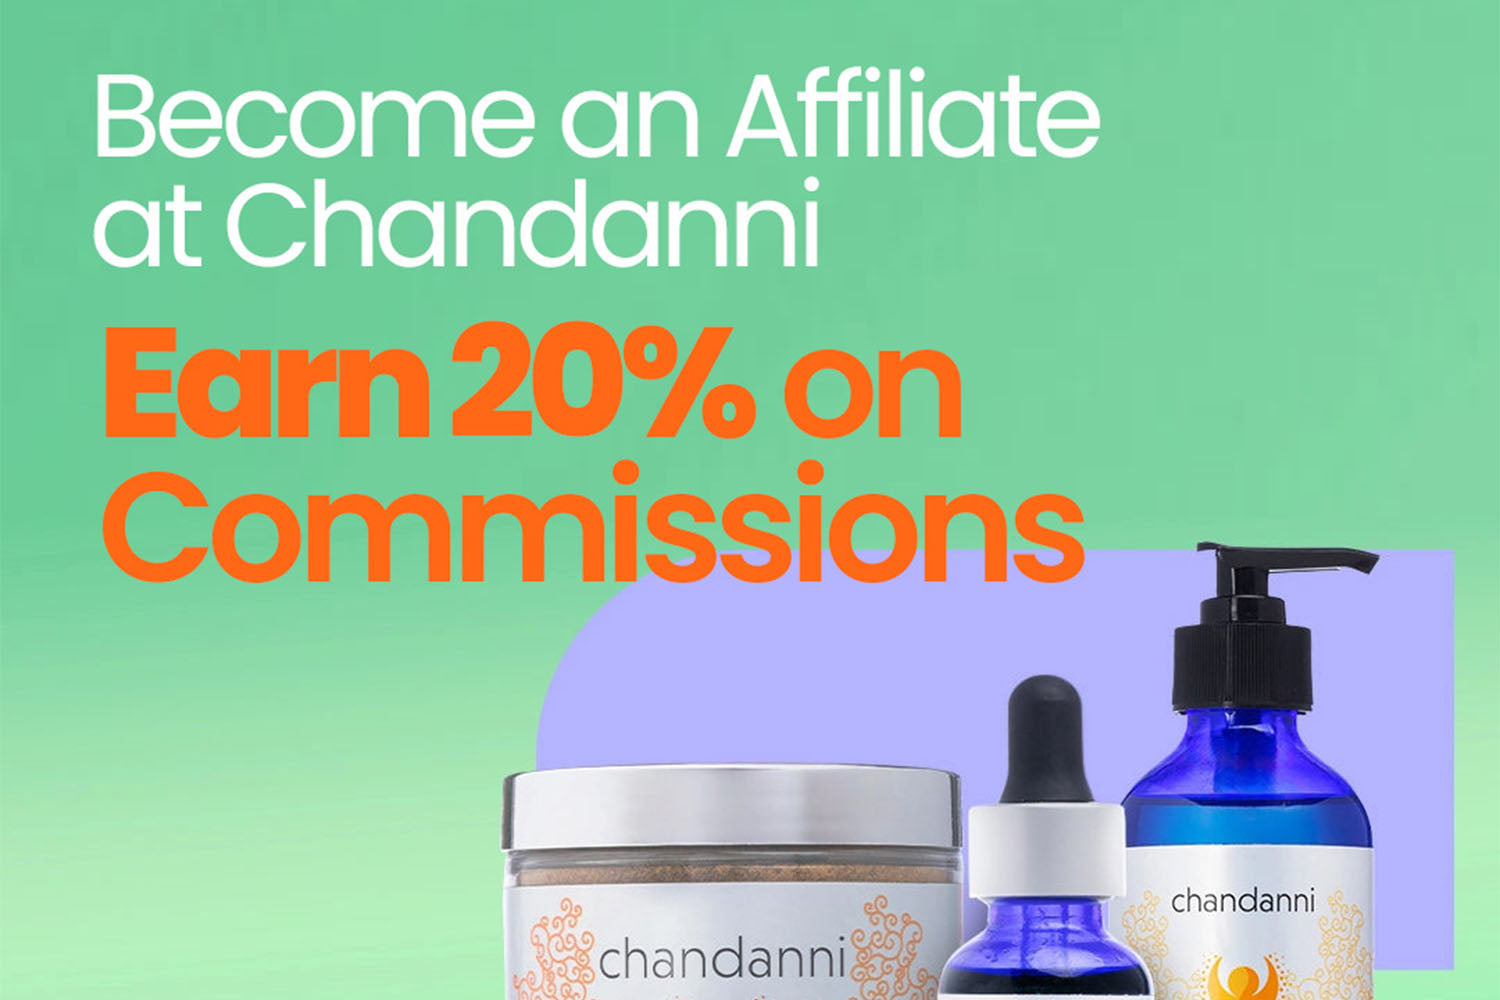 Spreading Wellness - How Chandanni Affiliates Earn 20% on Commissions